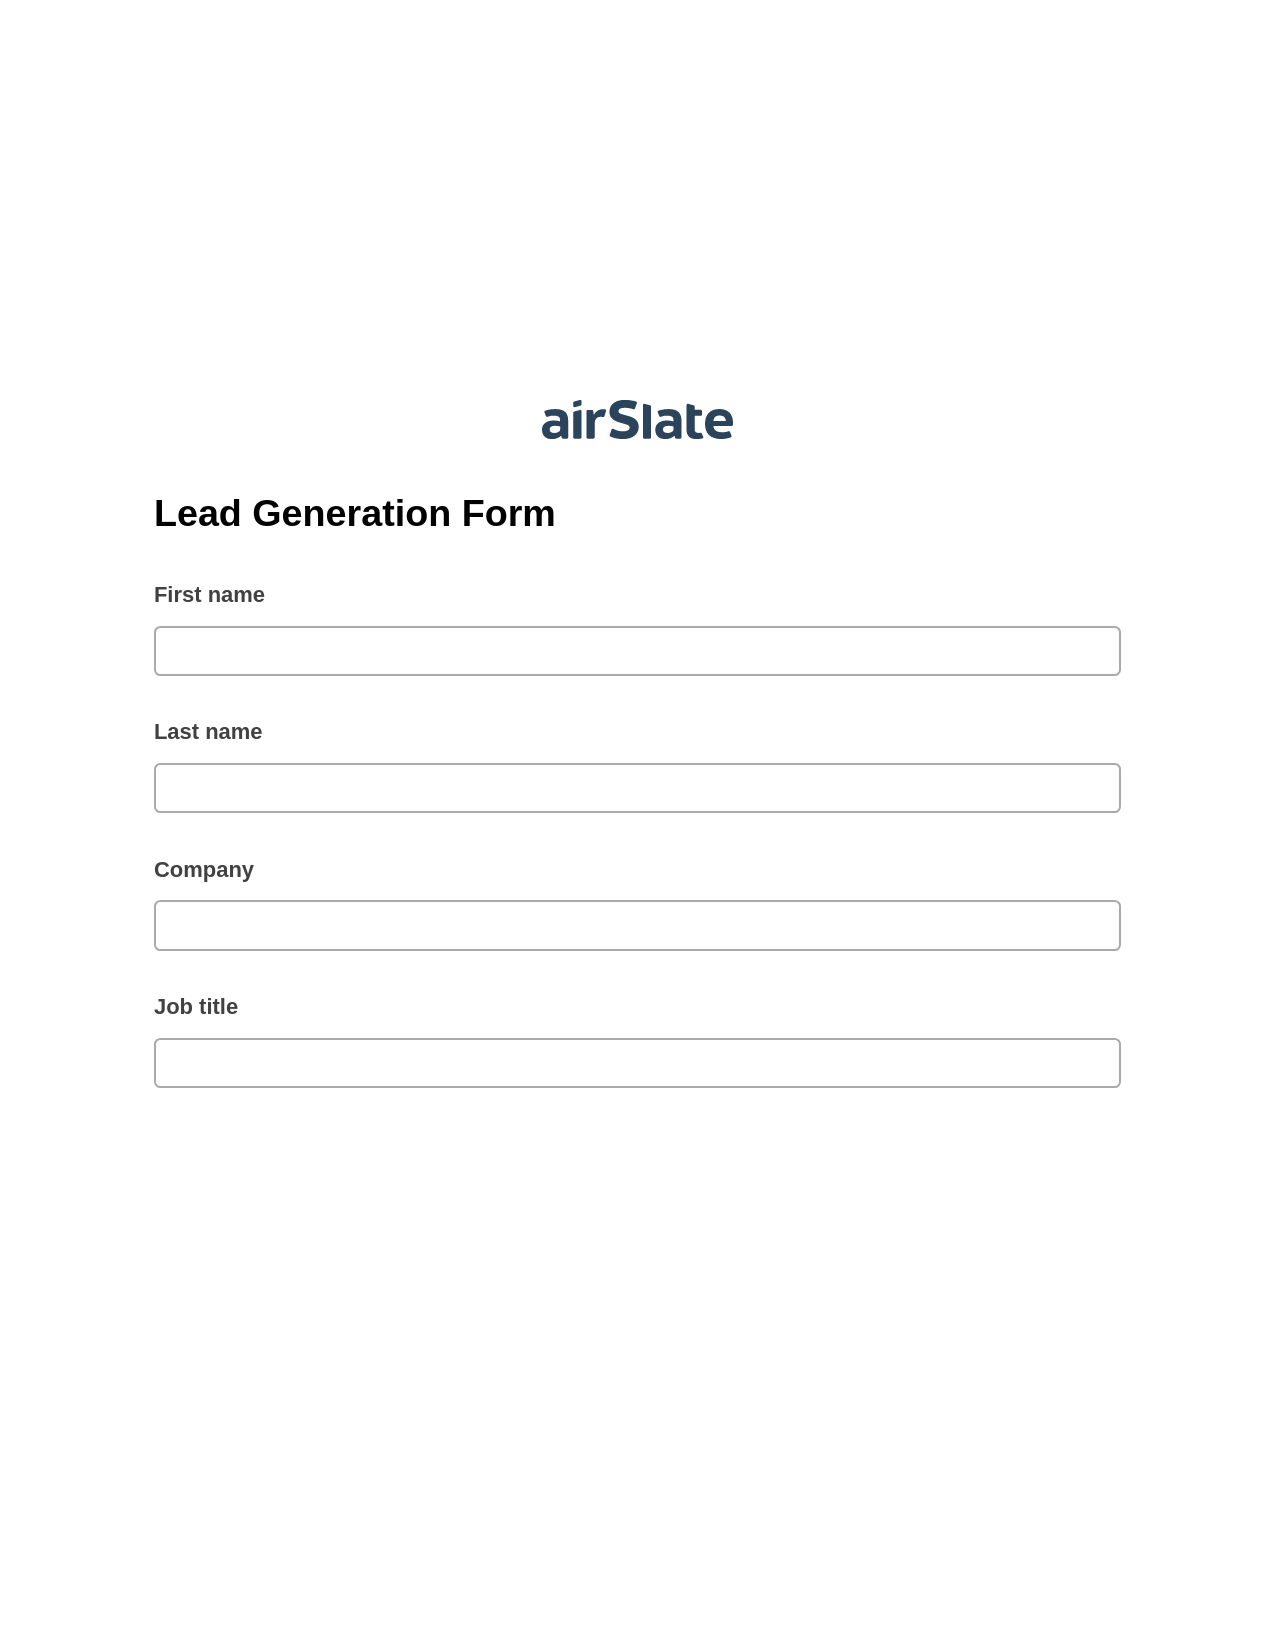 Lead Generation Form Pre-fill from CSV File Bot, Send a Slate to Salesforce Contact Bot, Export to Salesforce Record Bot